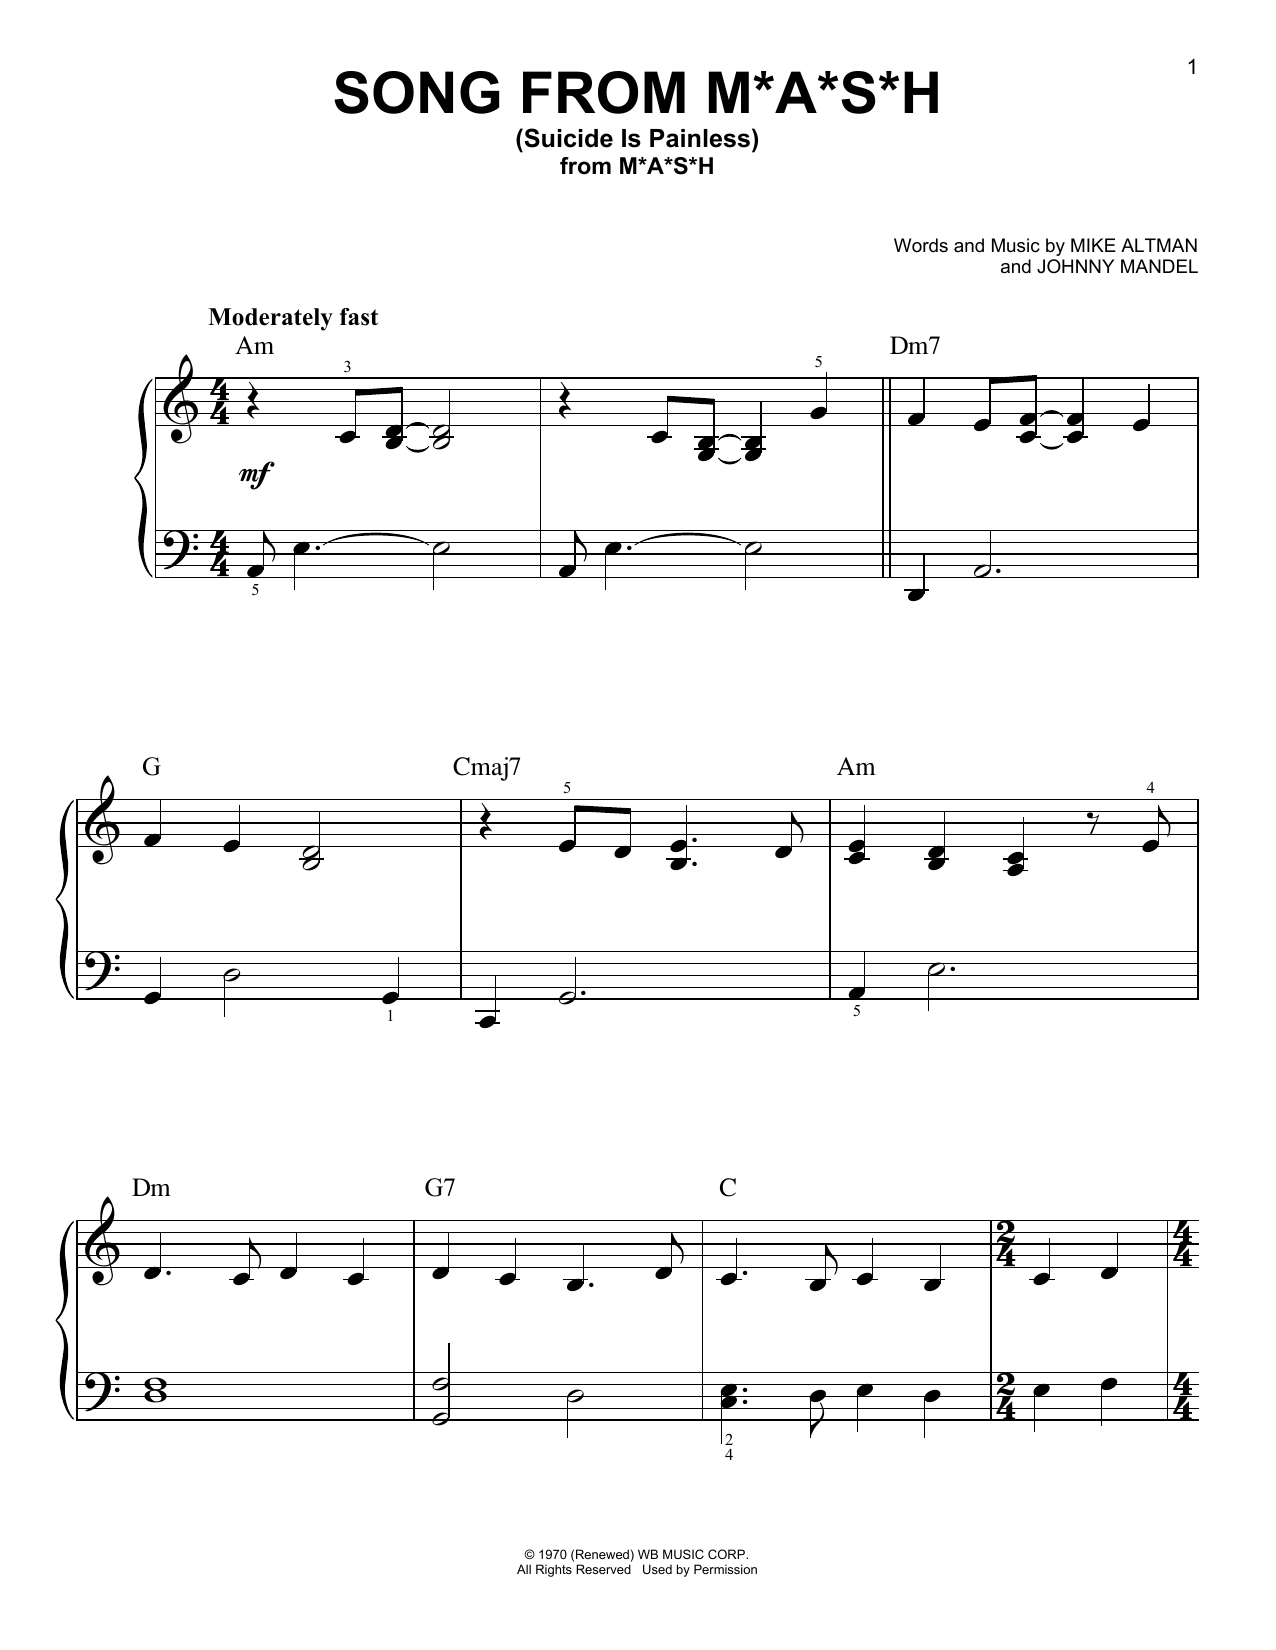 Download Mike Altman and Johnny Mandel Song From M*A*S*H (Suicide Is Painless) Sheet Music